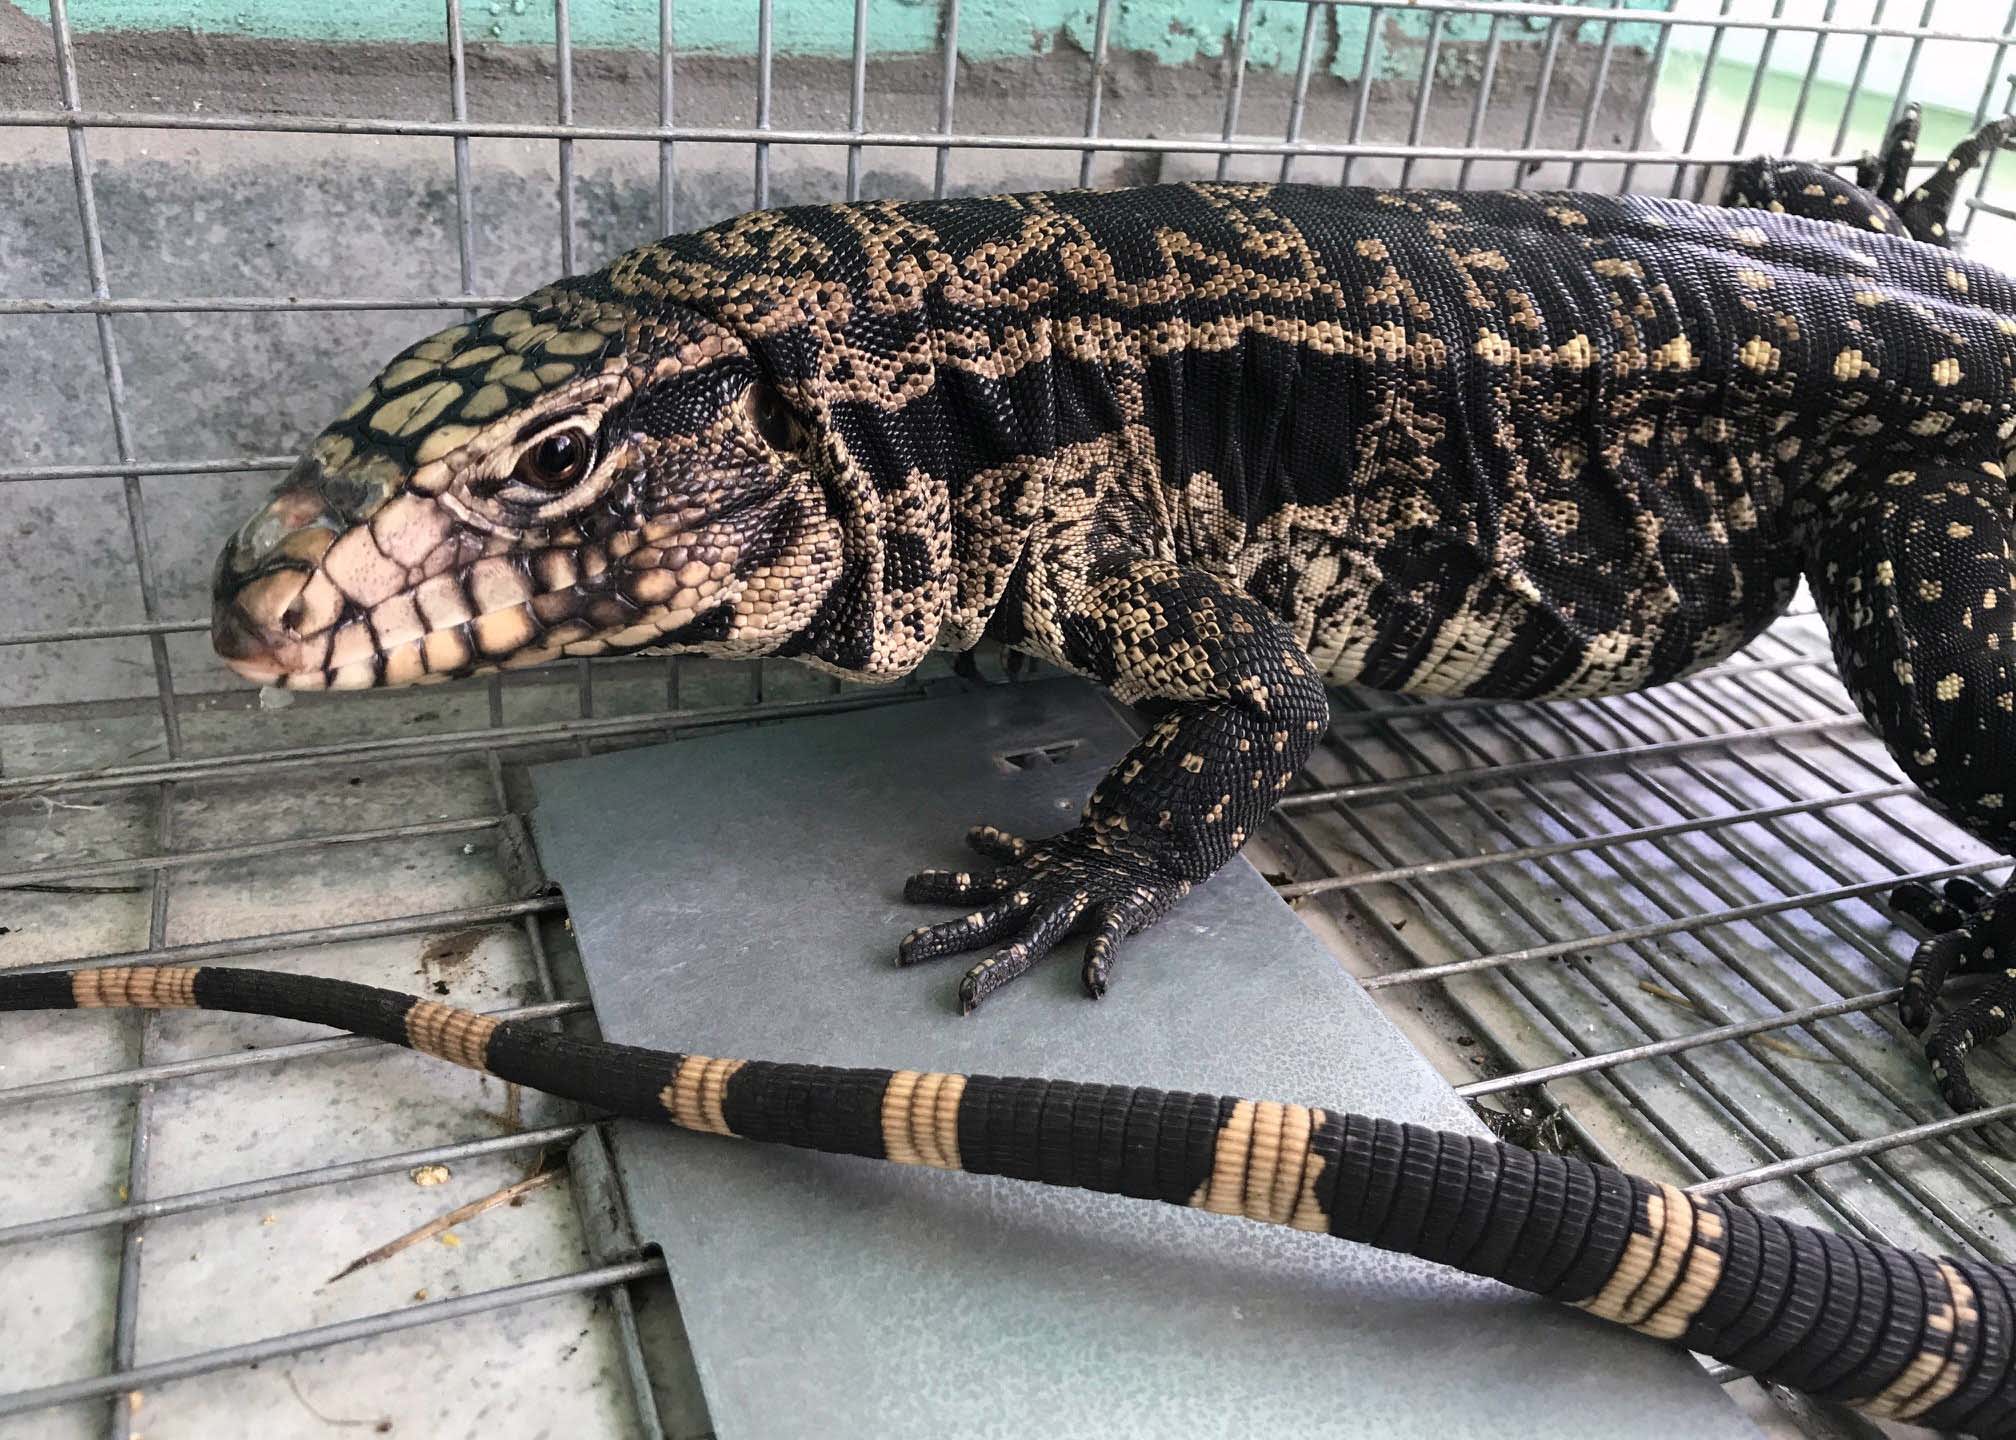 Invasive tegu lizards thriving in South Florida, moving upstate, FWC says